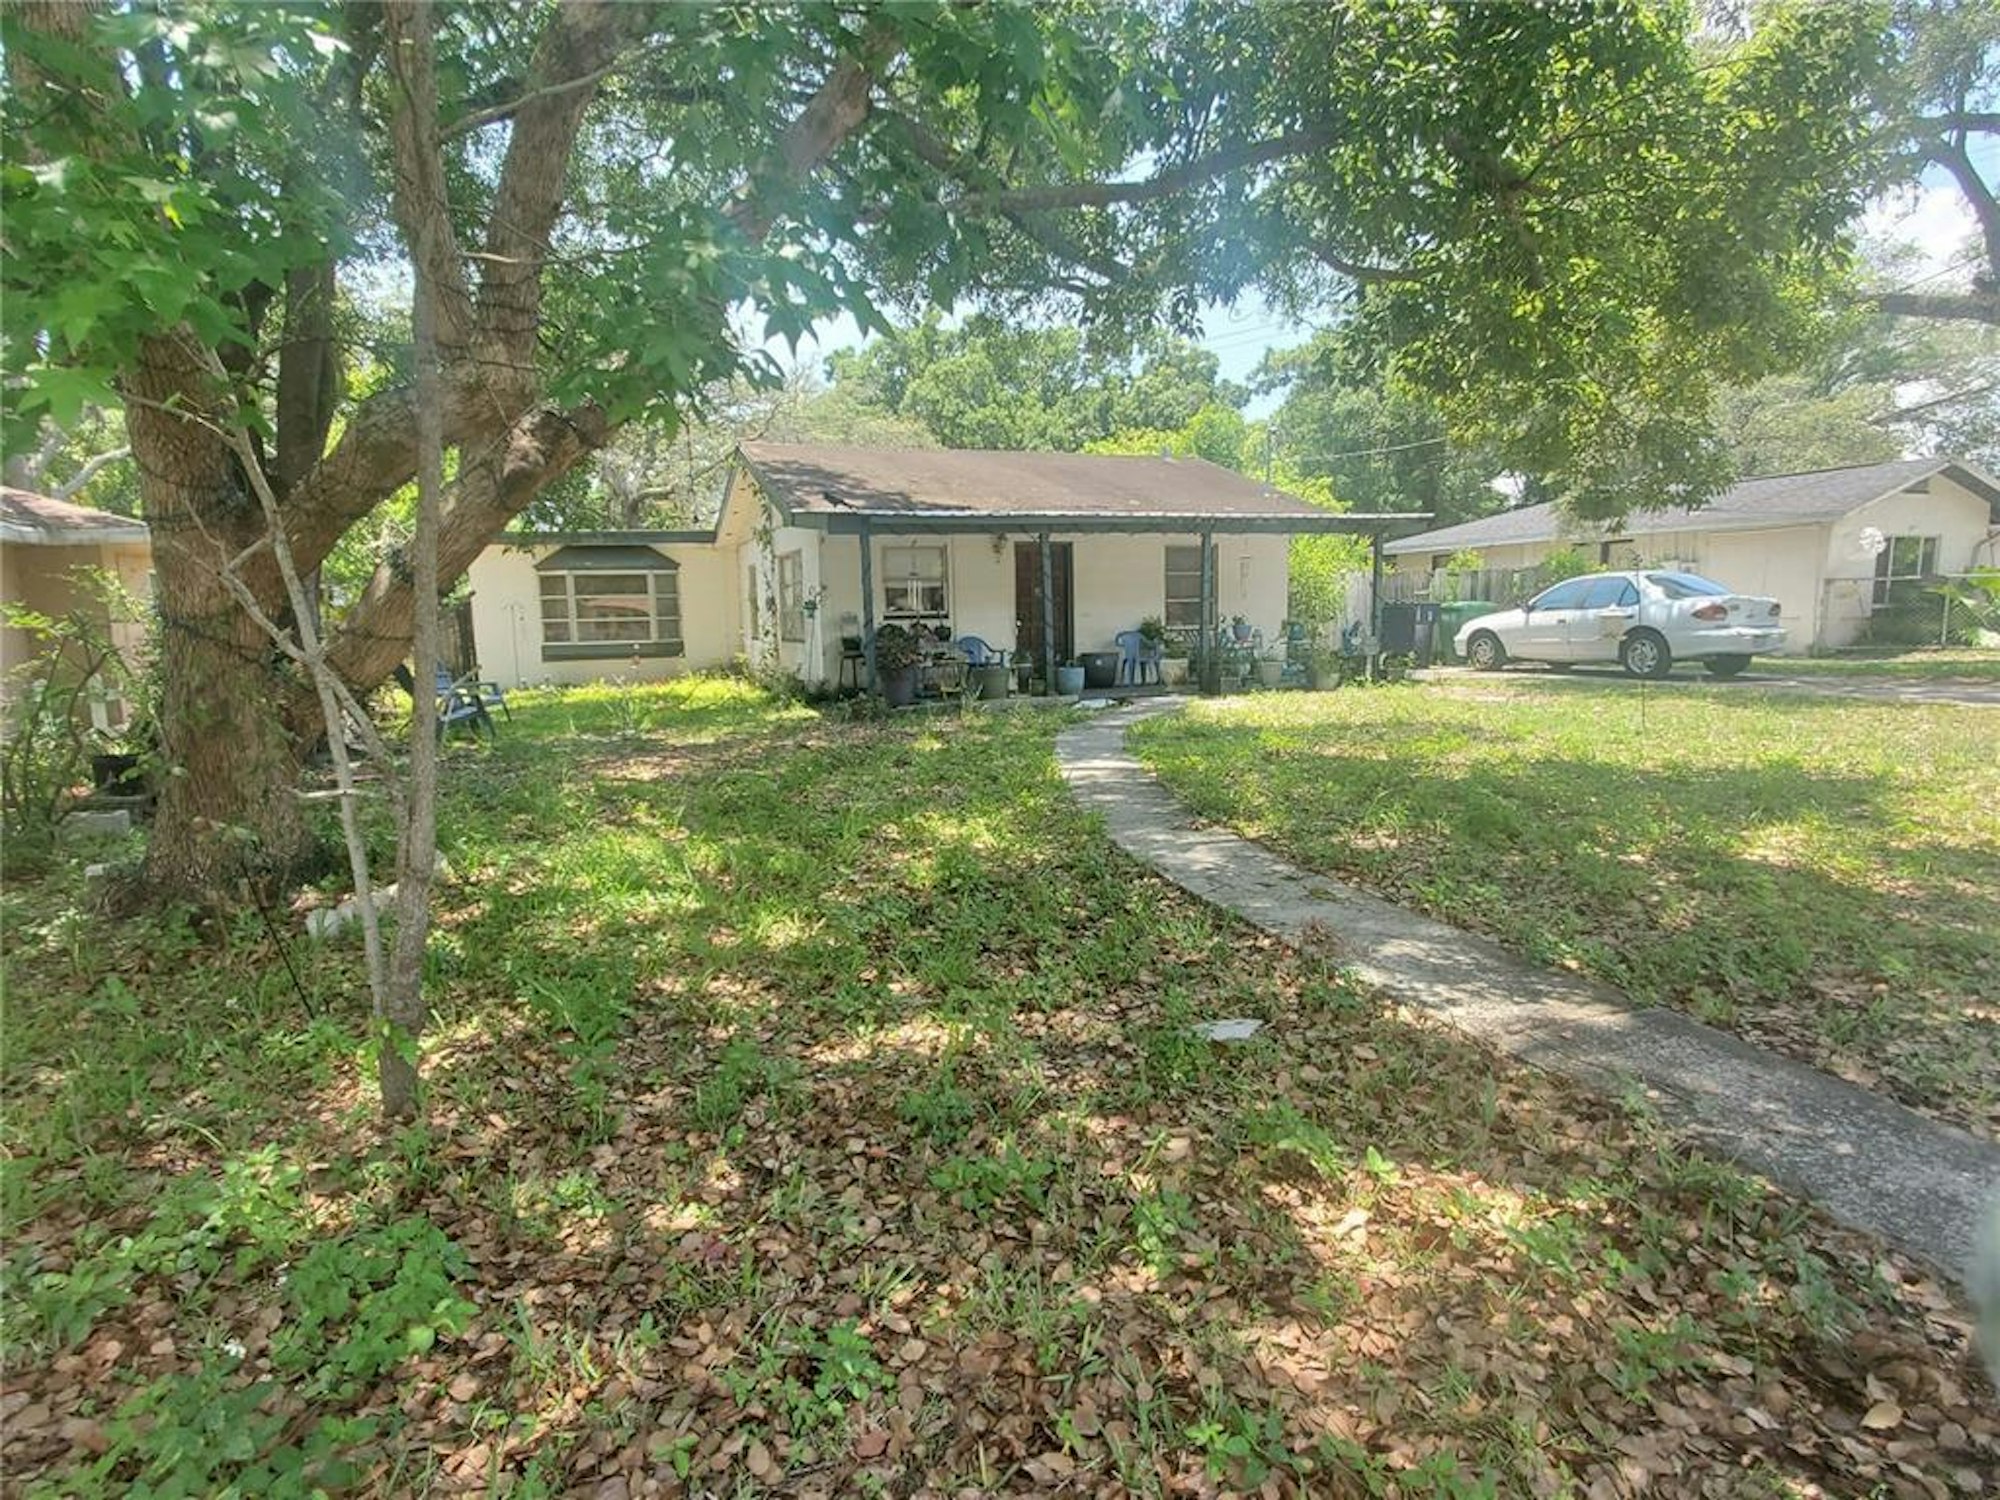 Photo 1 of 77 - 1610 W Knollwood St, Tampa, FL 33604